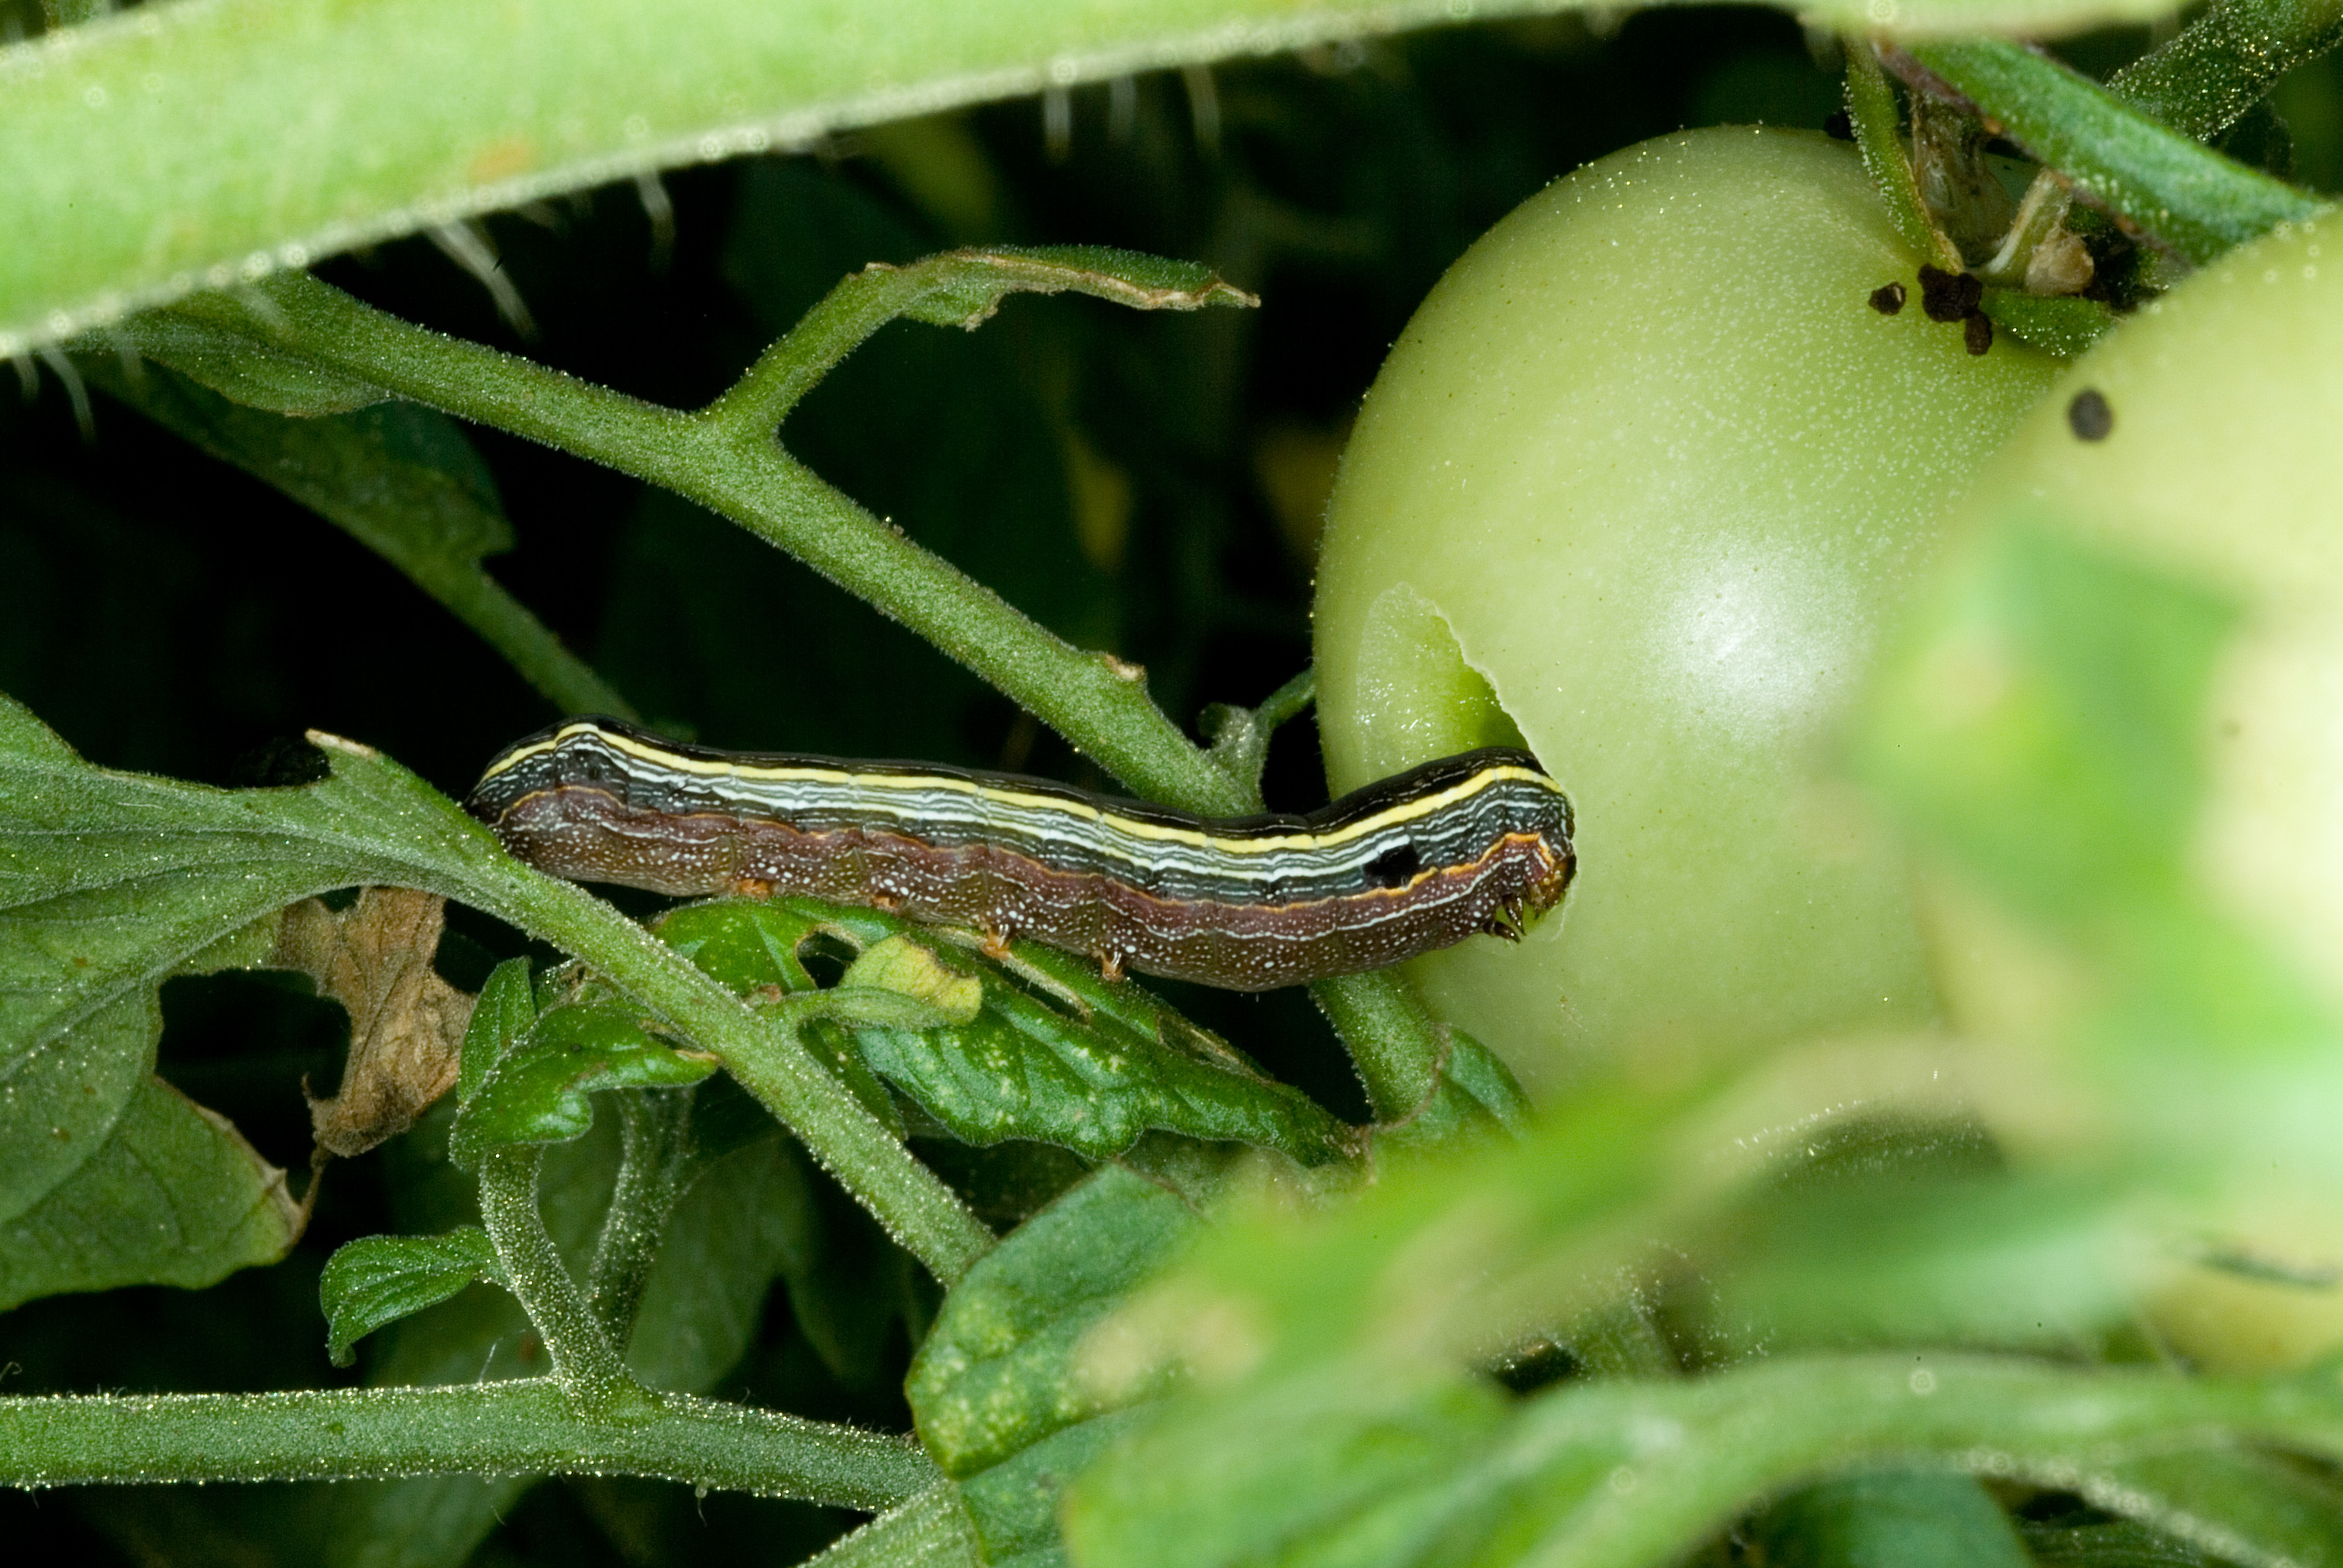 Yellow-striped armyworm in tomato fruit.